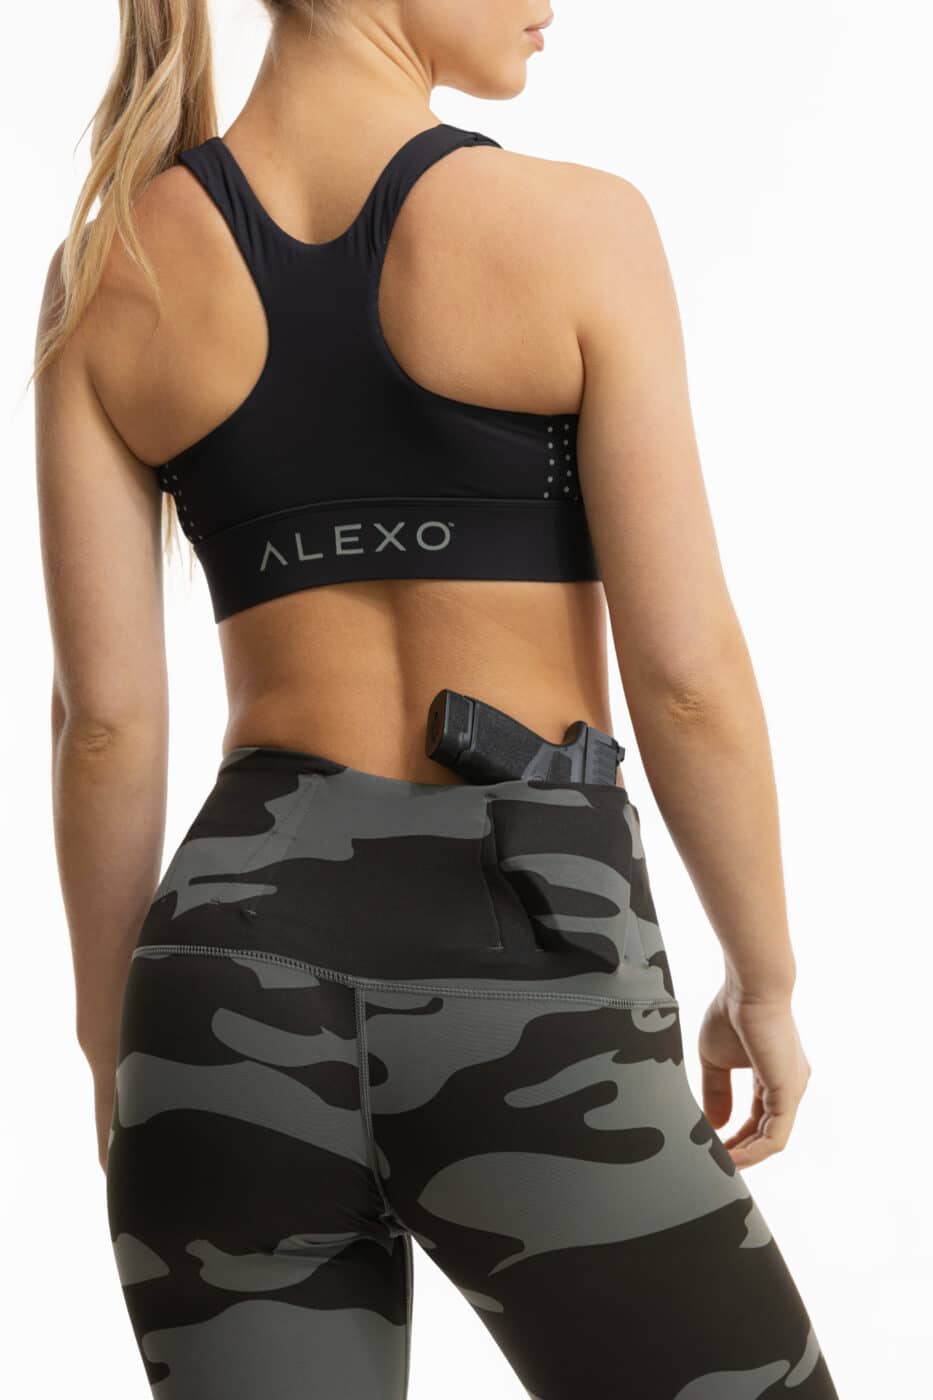 https://www.thearmorylife.com/wp-content/uploads/2022/04/article-first-look-alexo-x-sa-readywear-5.jpg